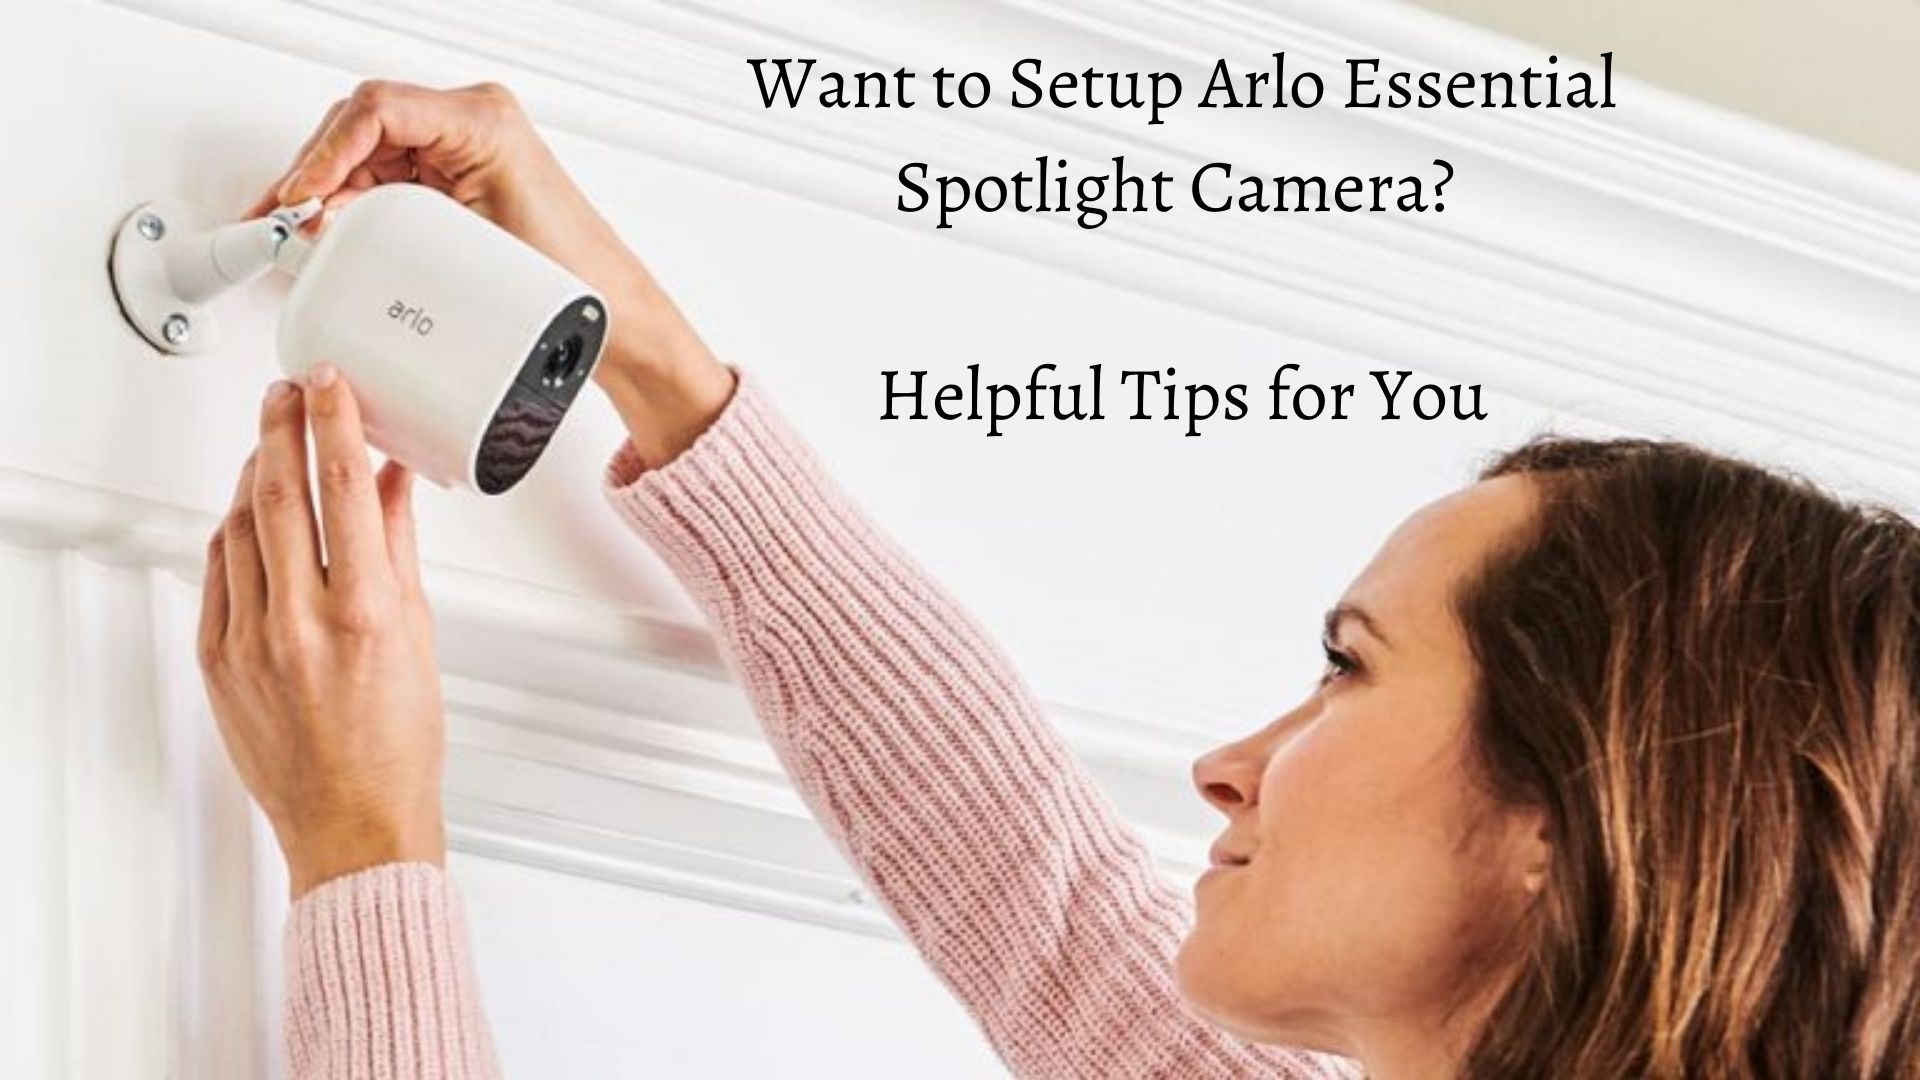 Want to Setup Arlo Essential Spotlight Camera? Helpful Tips for You